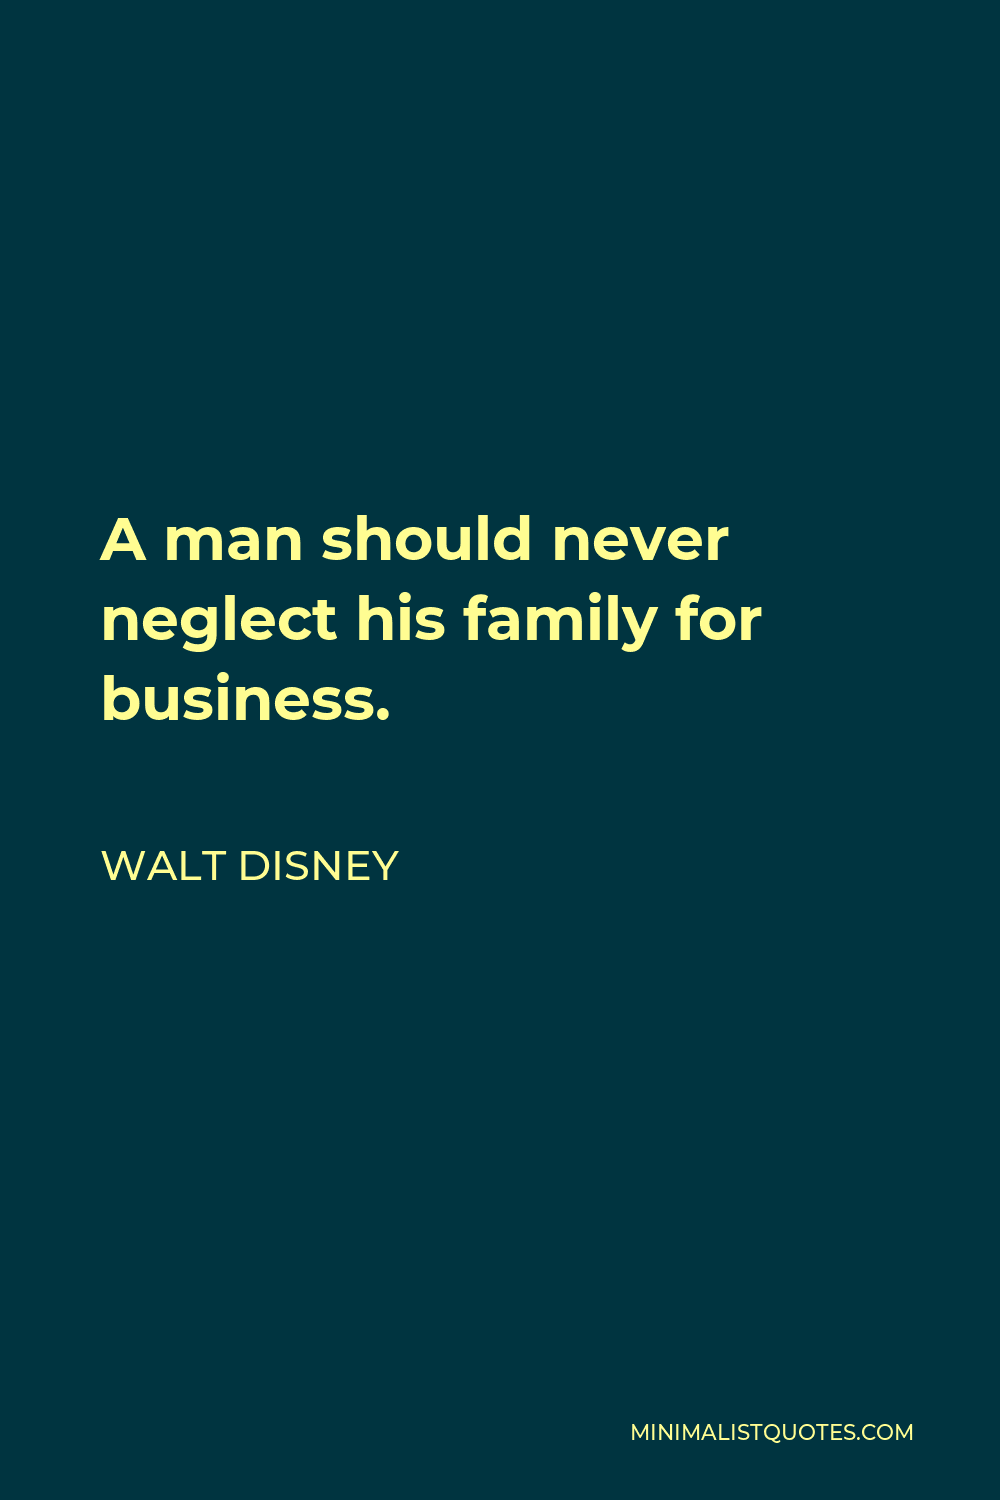 Walt Disney Quote - A man should never neglect his family for business.